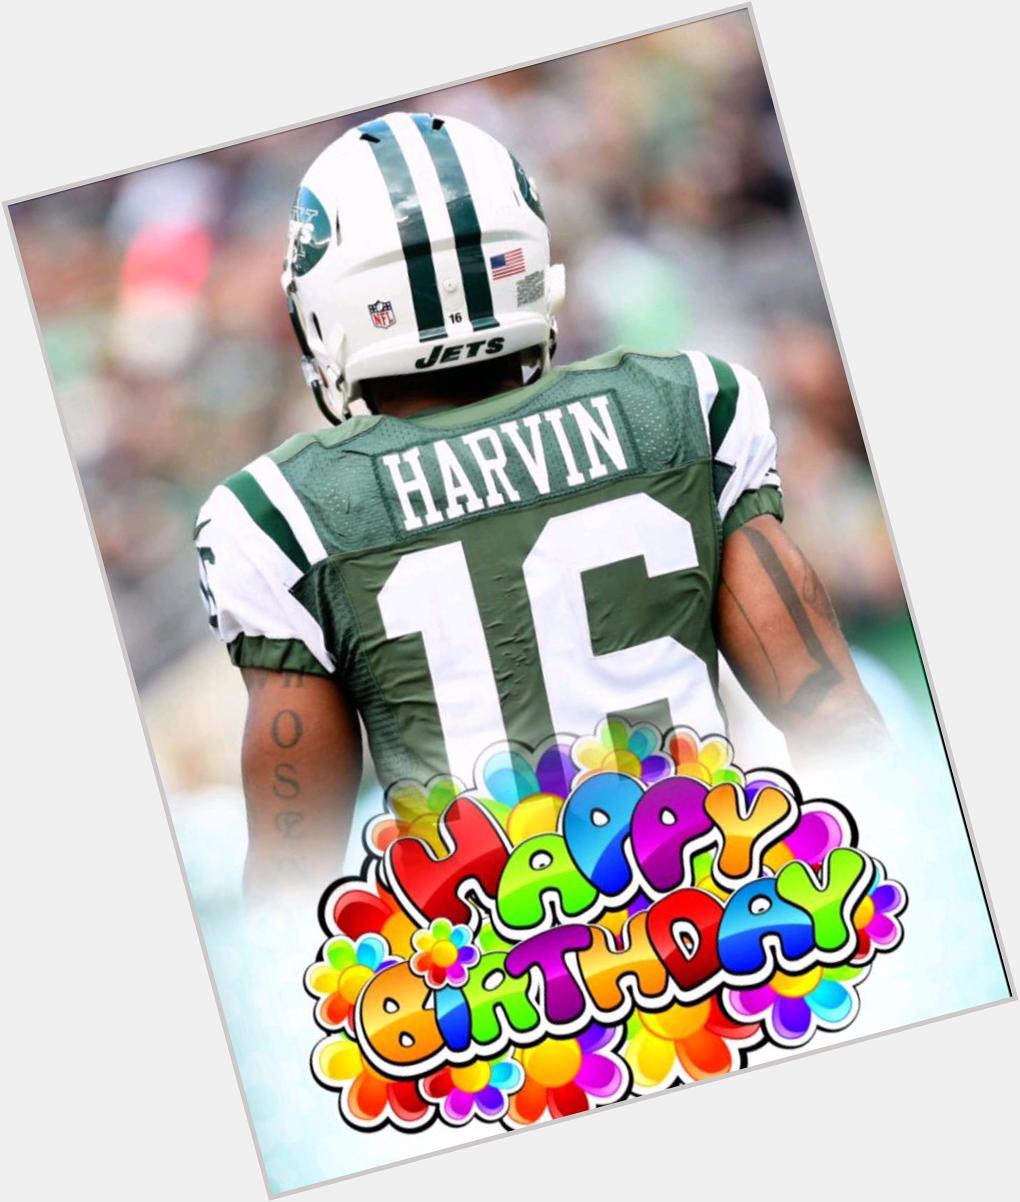 Happy Birthday Percy Harvin! Hopefully he can become a real threat on the this season! 